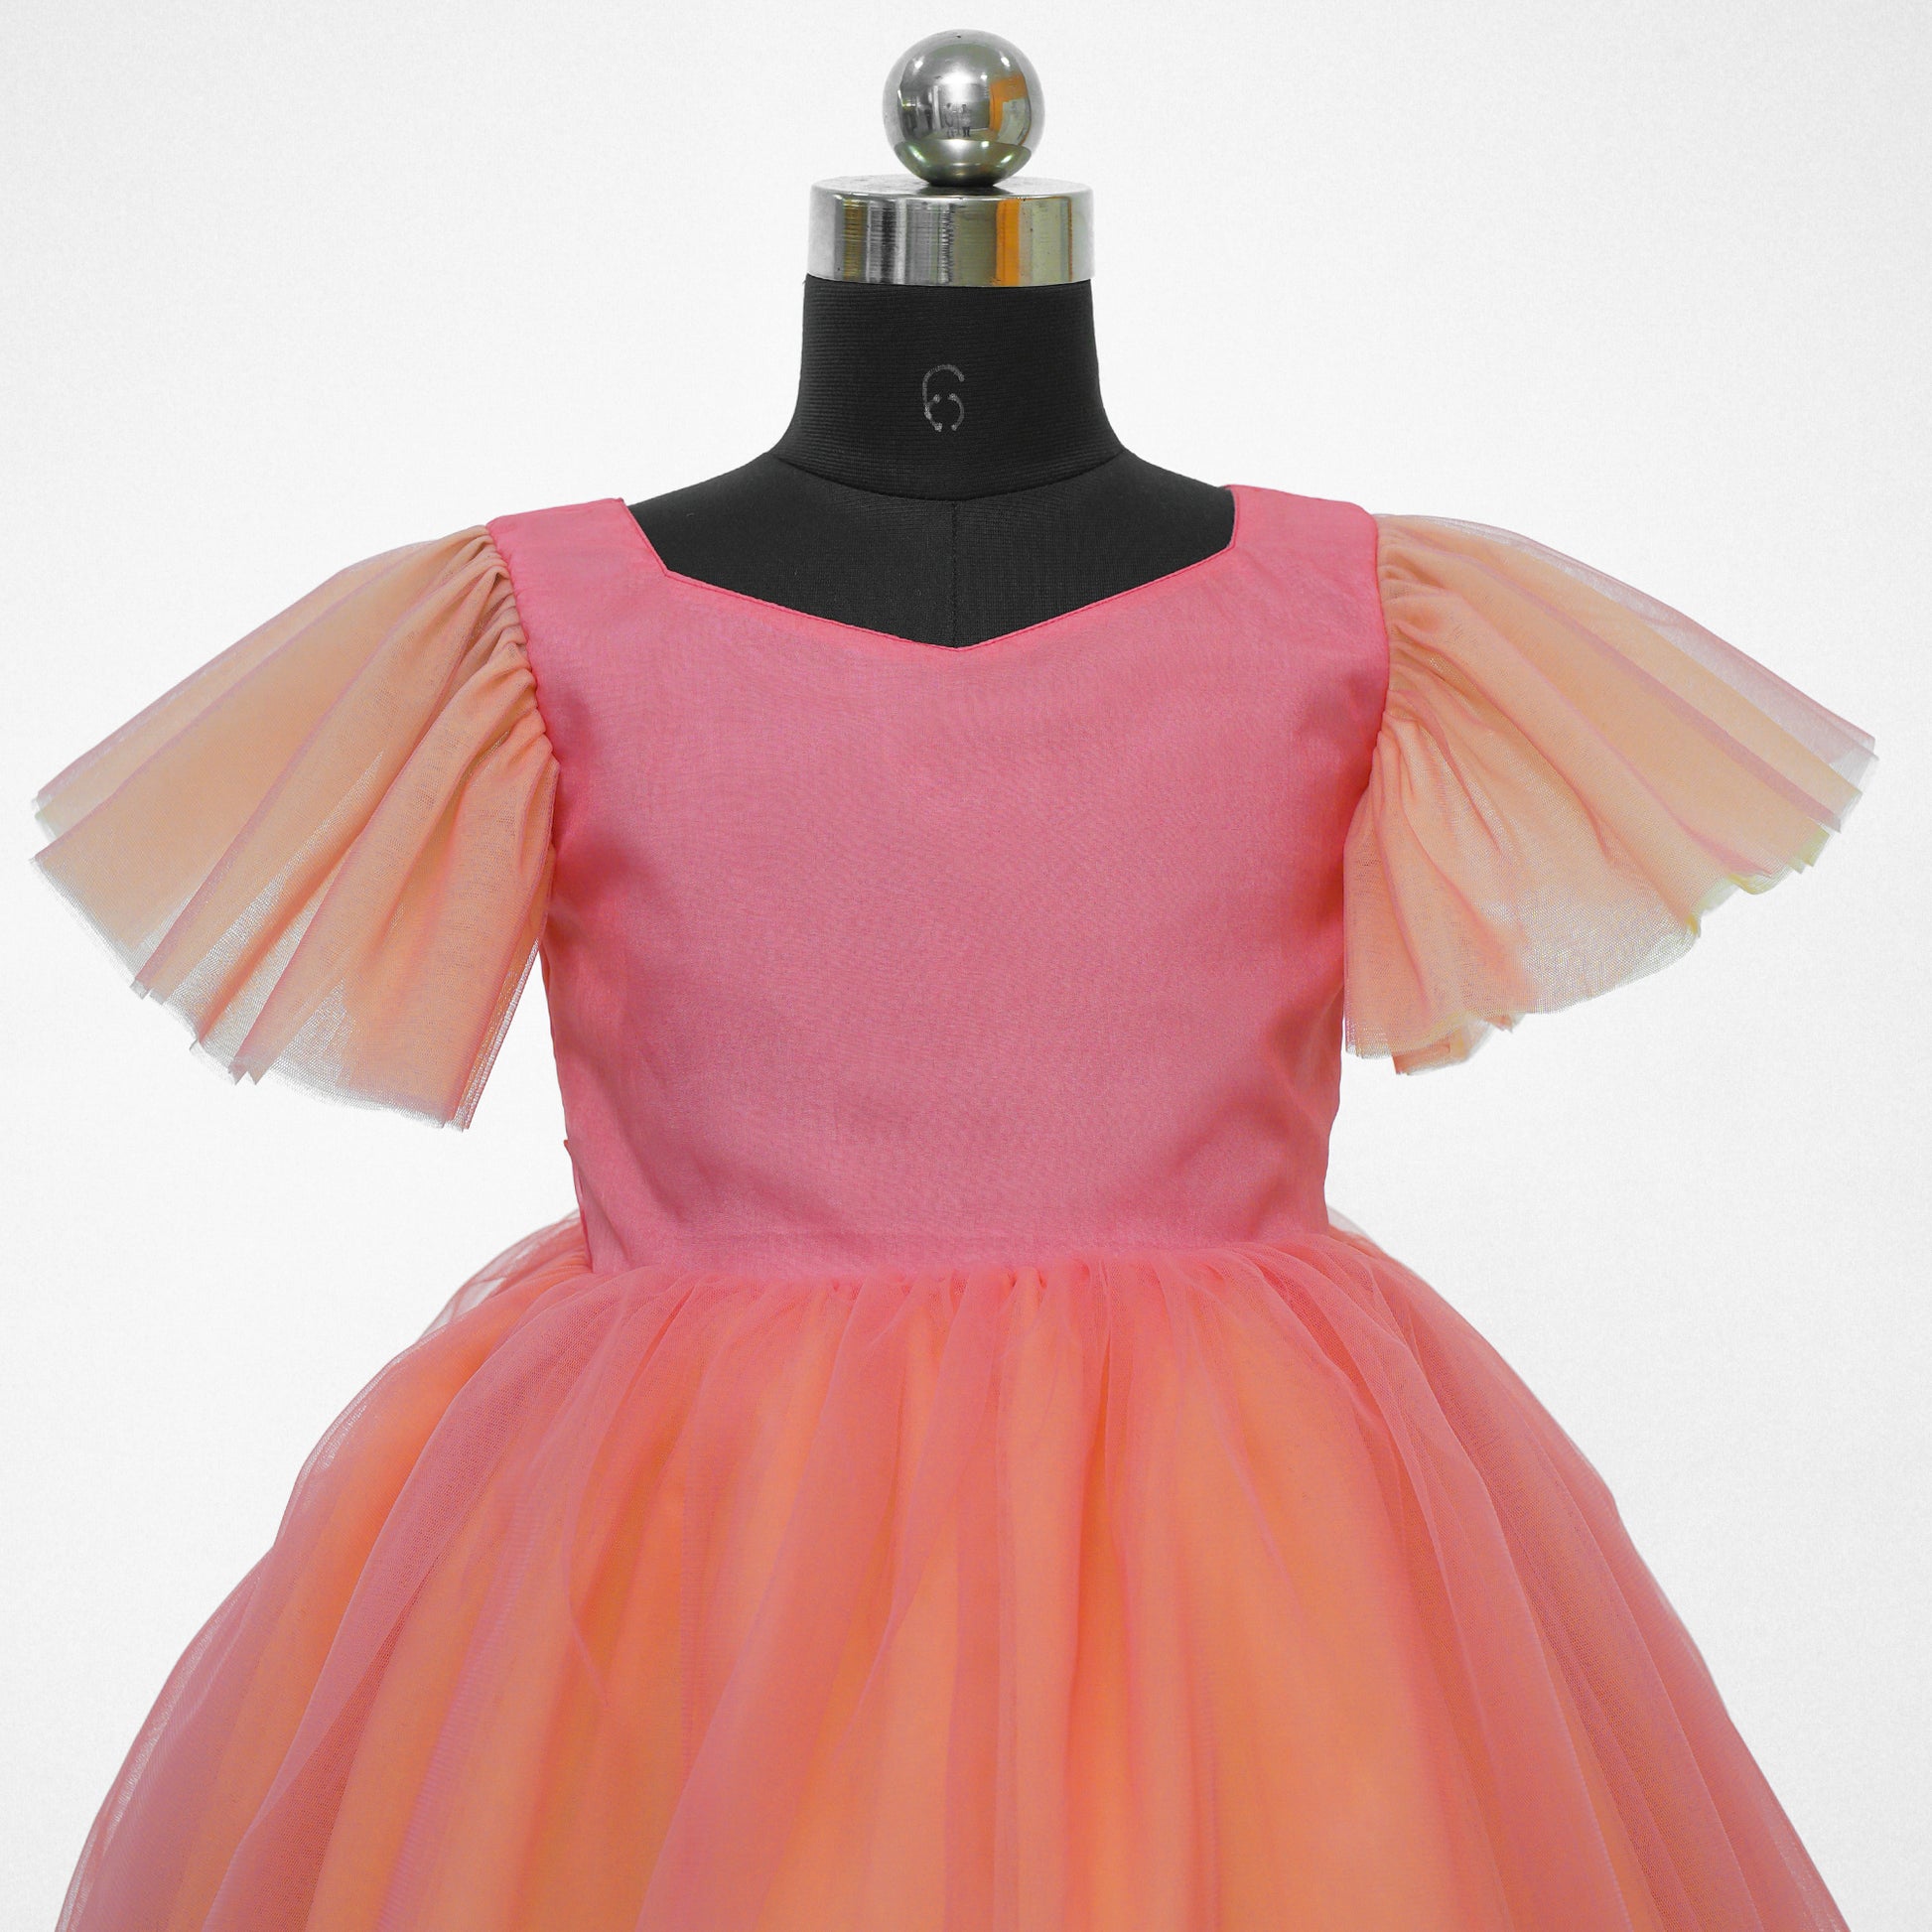 HEYKIDOO Kids Girls Solid Net Layered Birthday Frock-Peach birthday casual party wear frock dresses kids elegant comfortable collection.